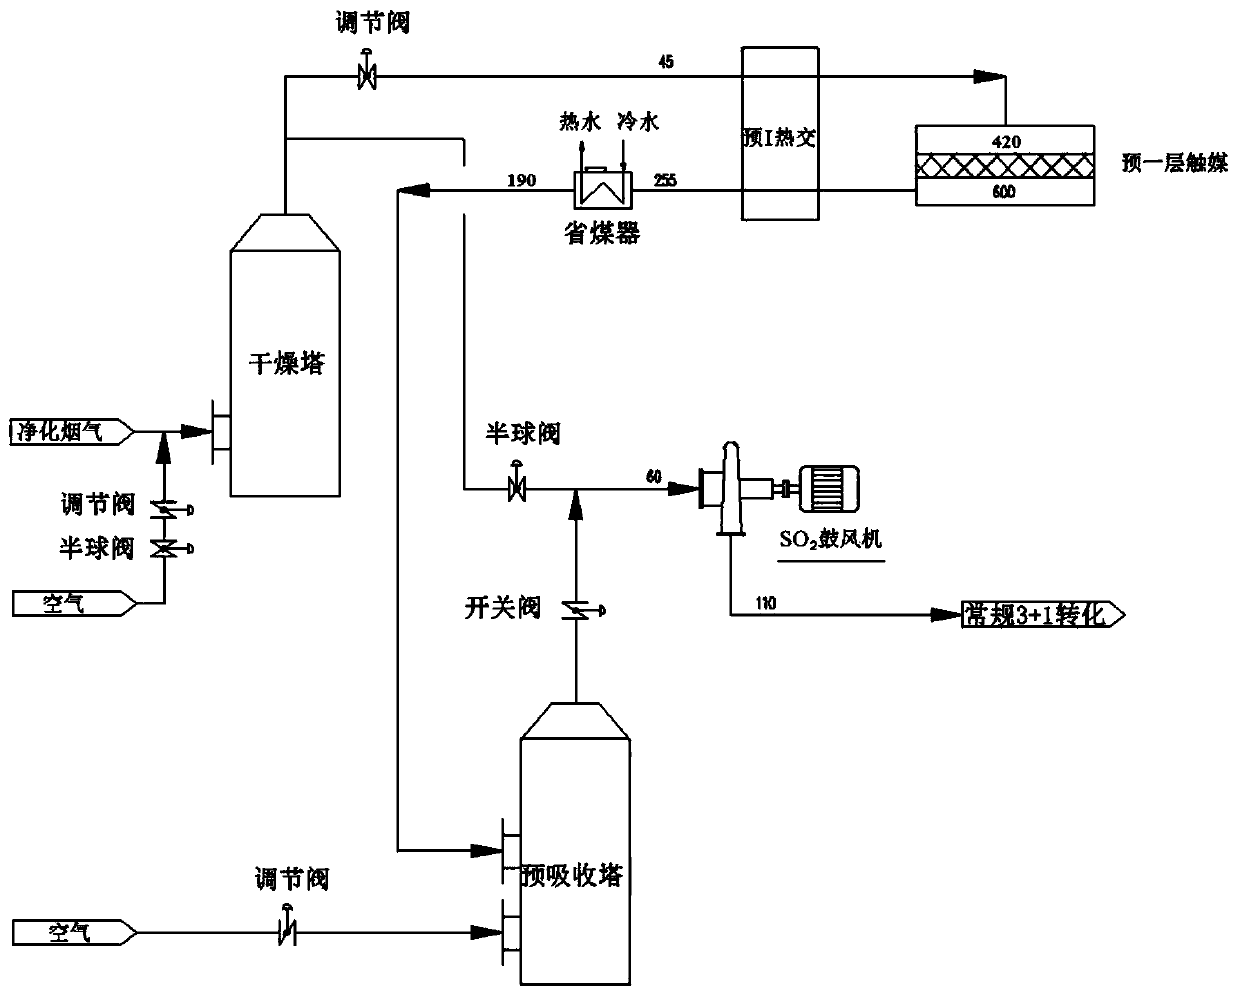 High concentration SO2 conversion acid making technology